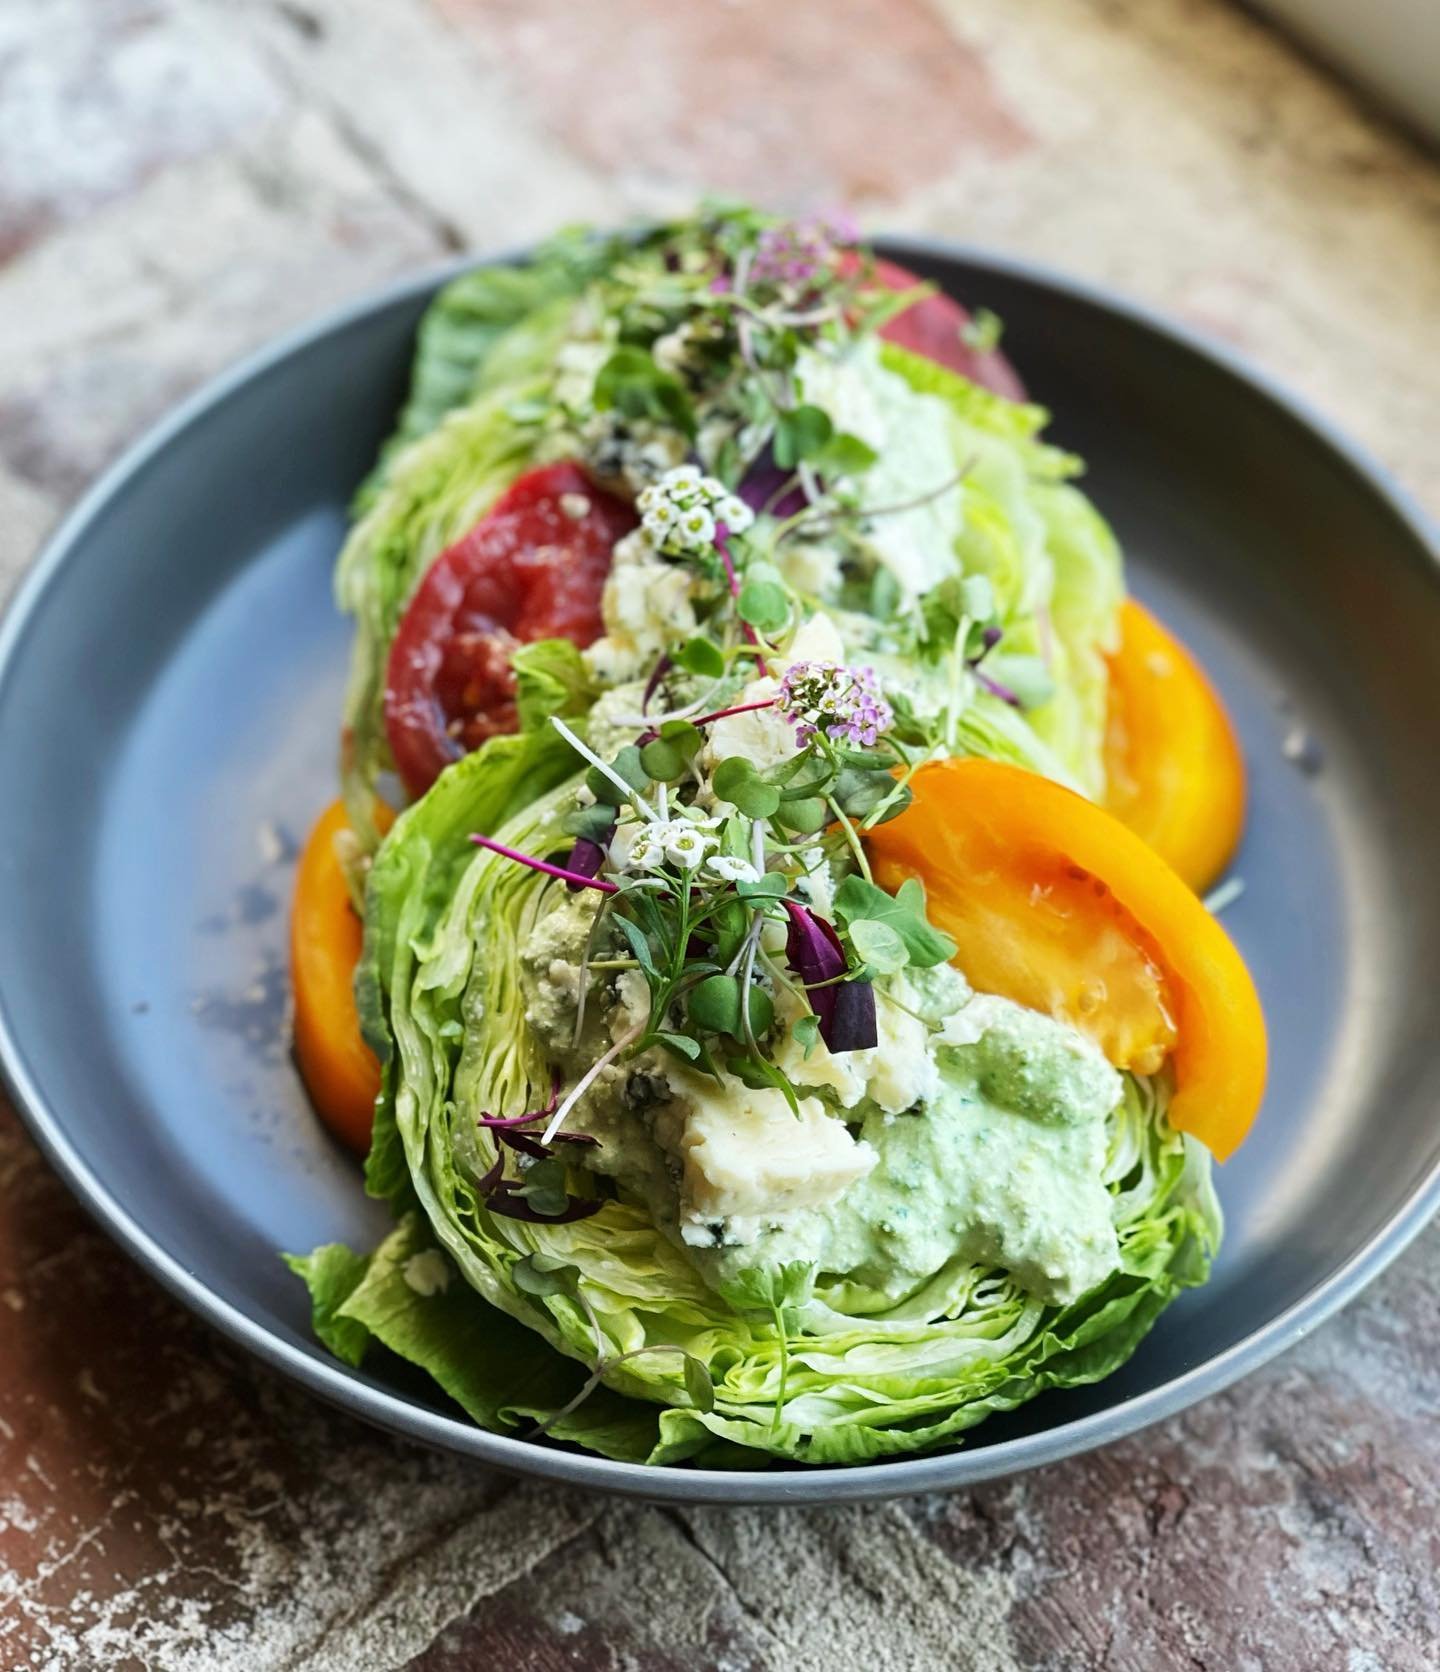 The official salad of Wedge-wood Houston.
&bull;
SUMMER WEDGE // baby iceberg, heirloom tomato, @hookscheeseco blue, bacon tallow blue cheese dressing.
&bull;
{dinner | 5-10pm.}